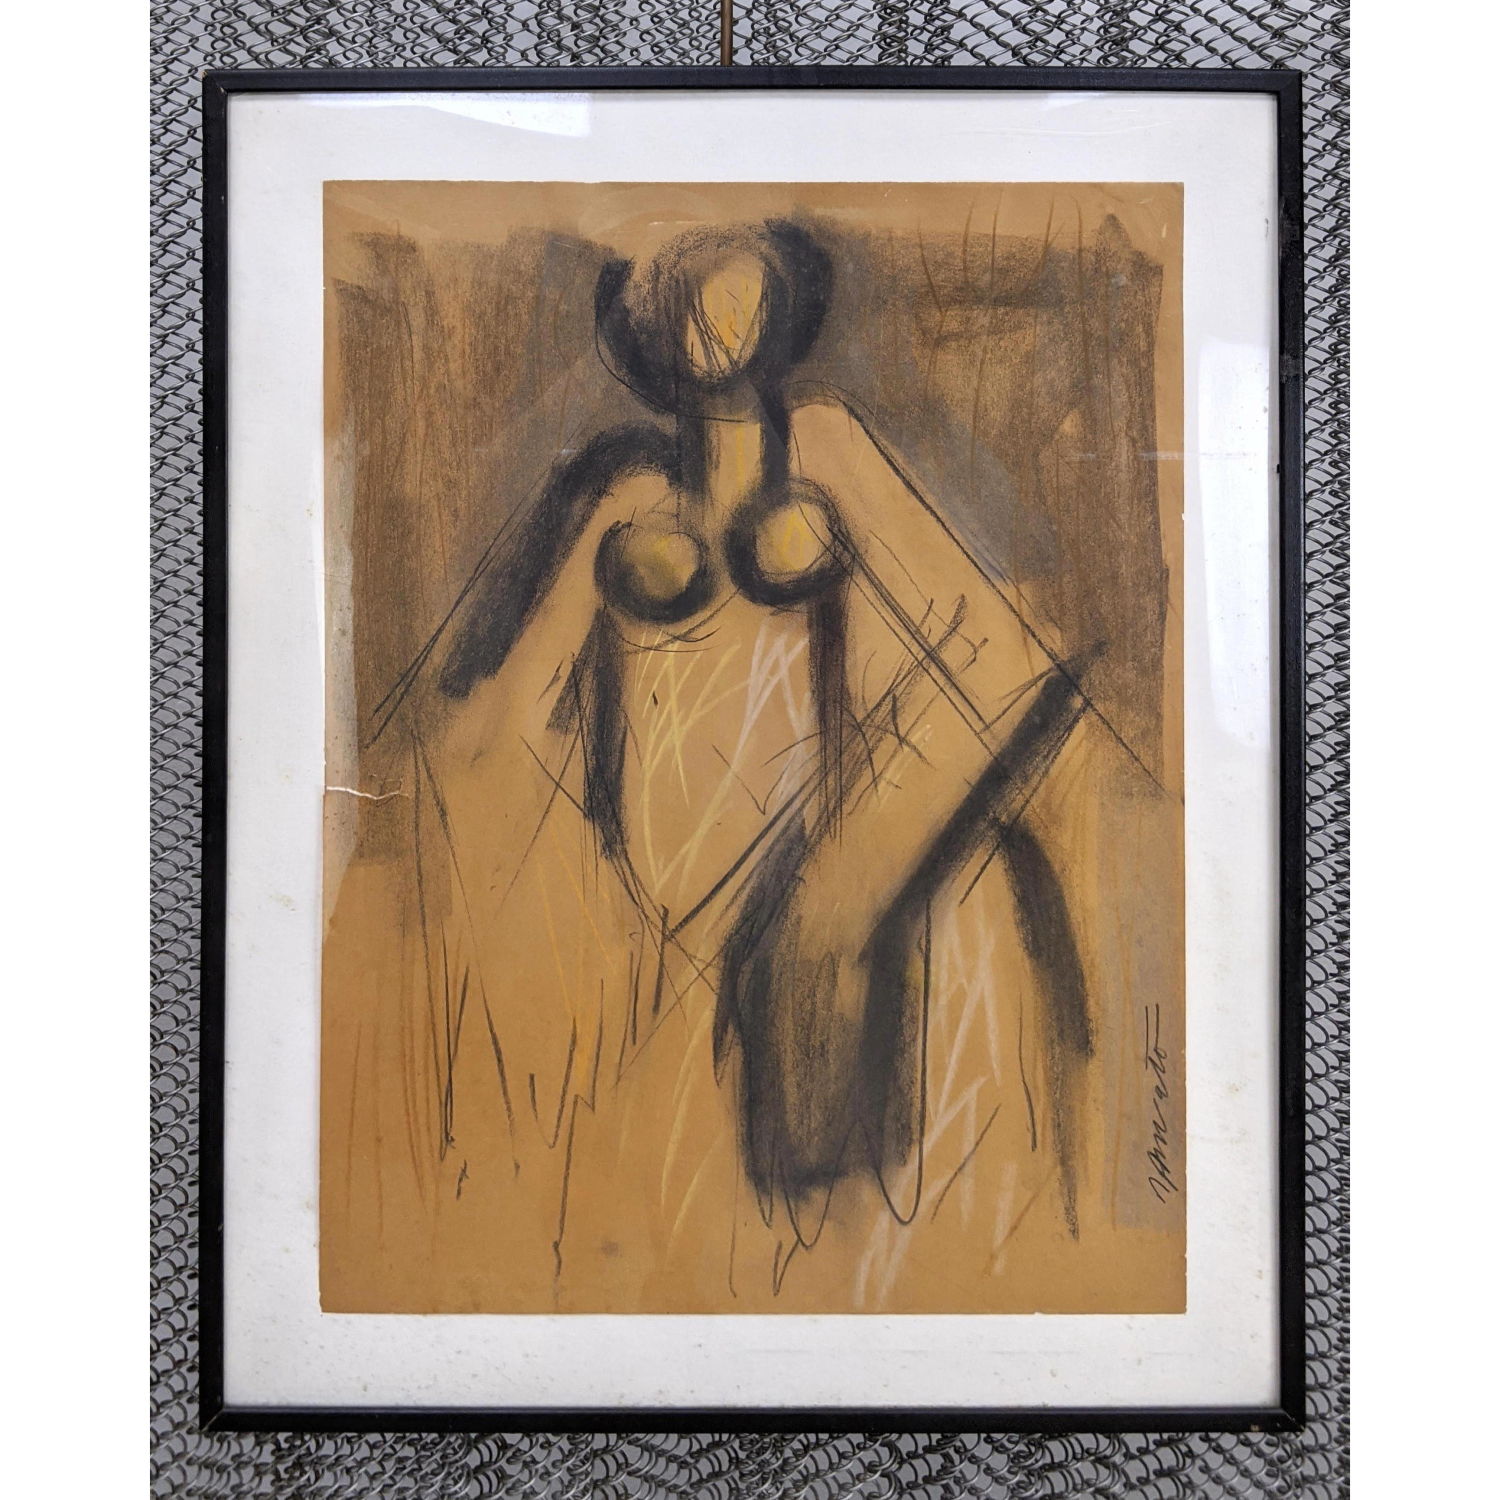 GEORGE D AMATO Signed Charcoal 2b8a25